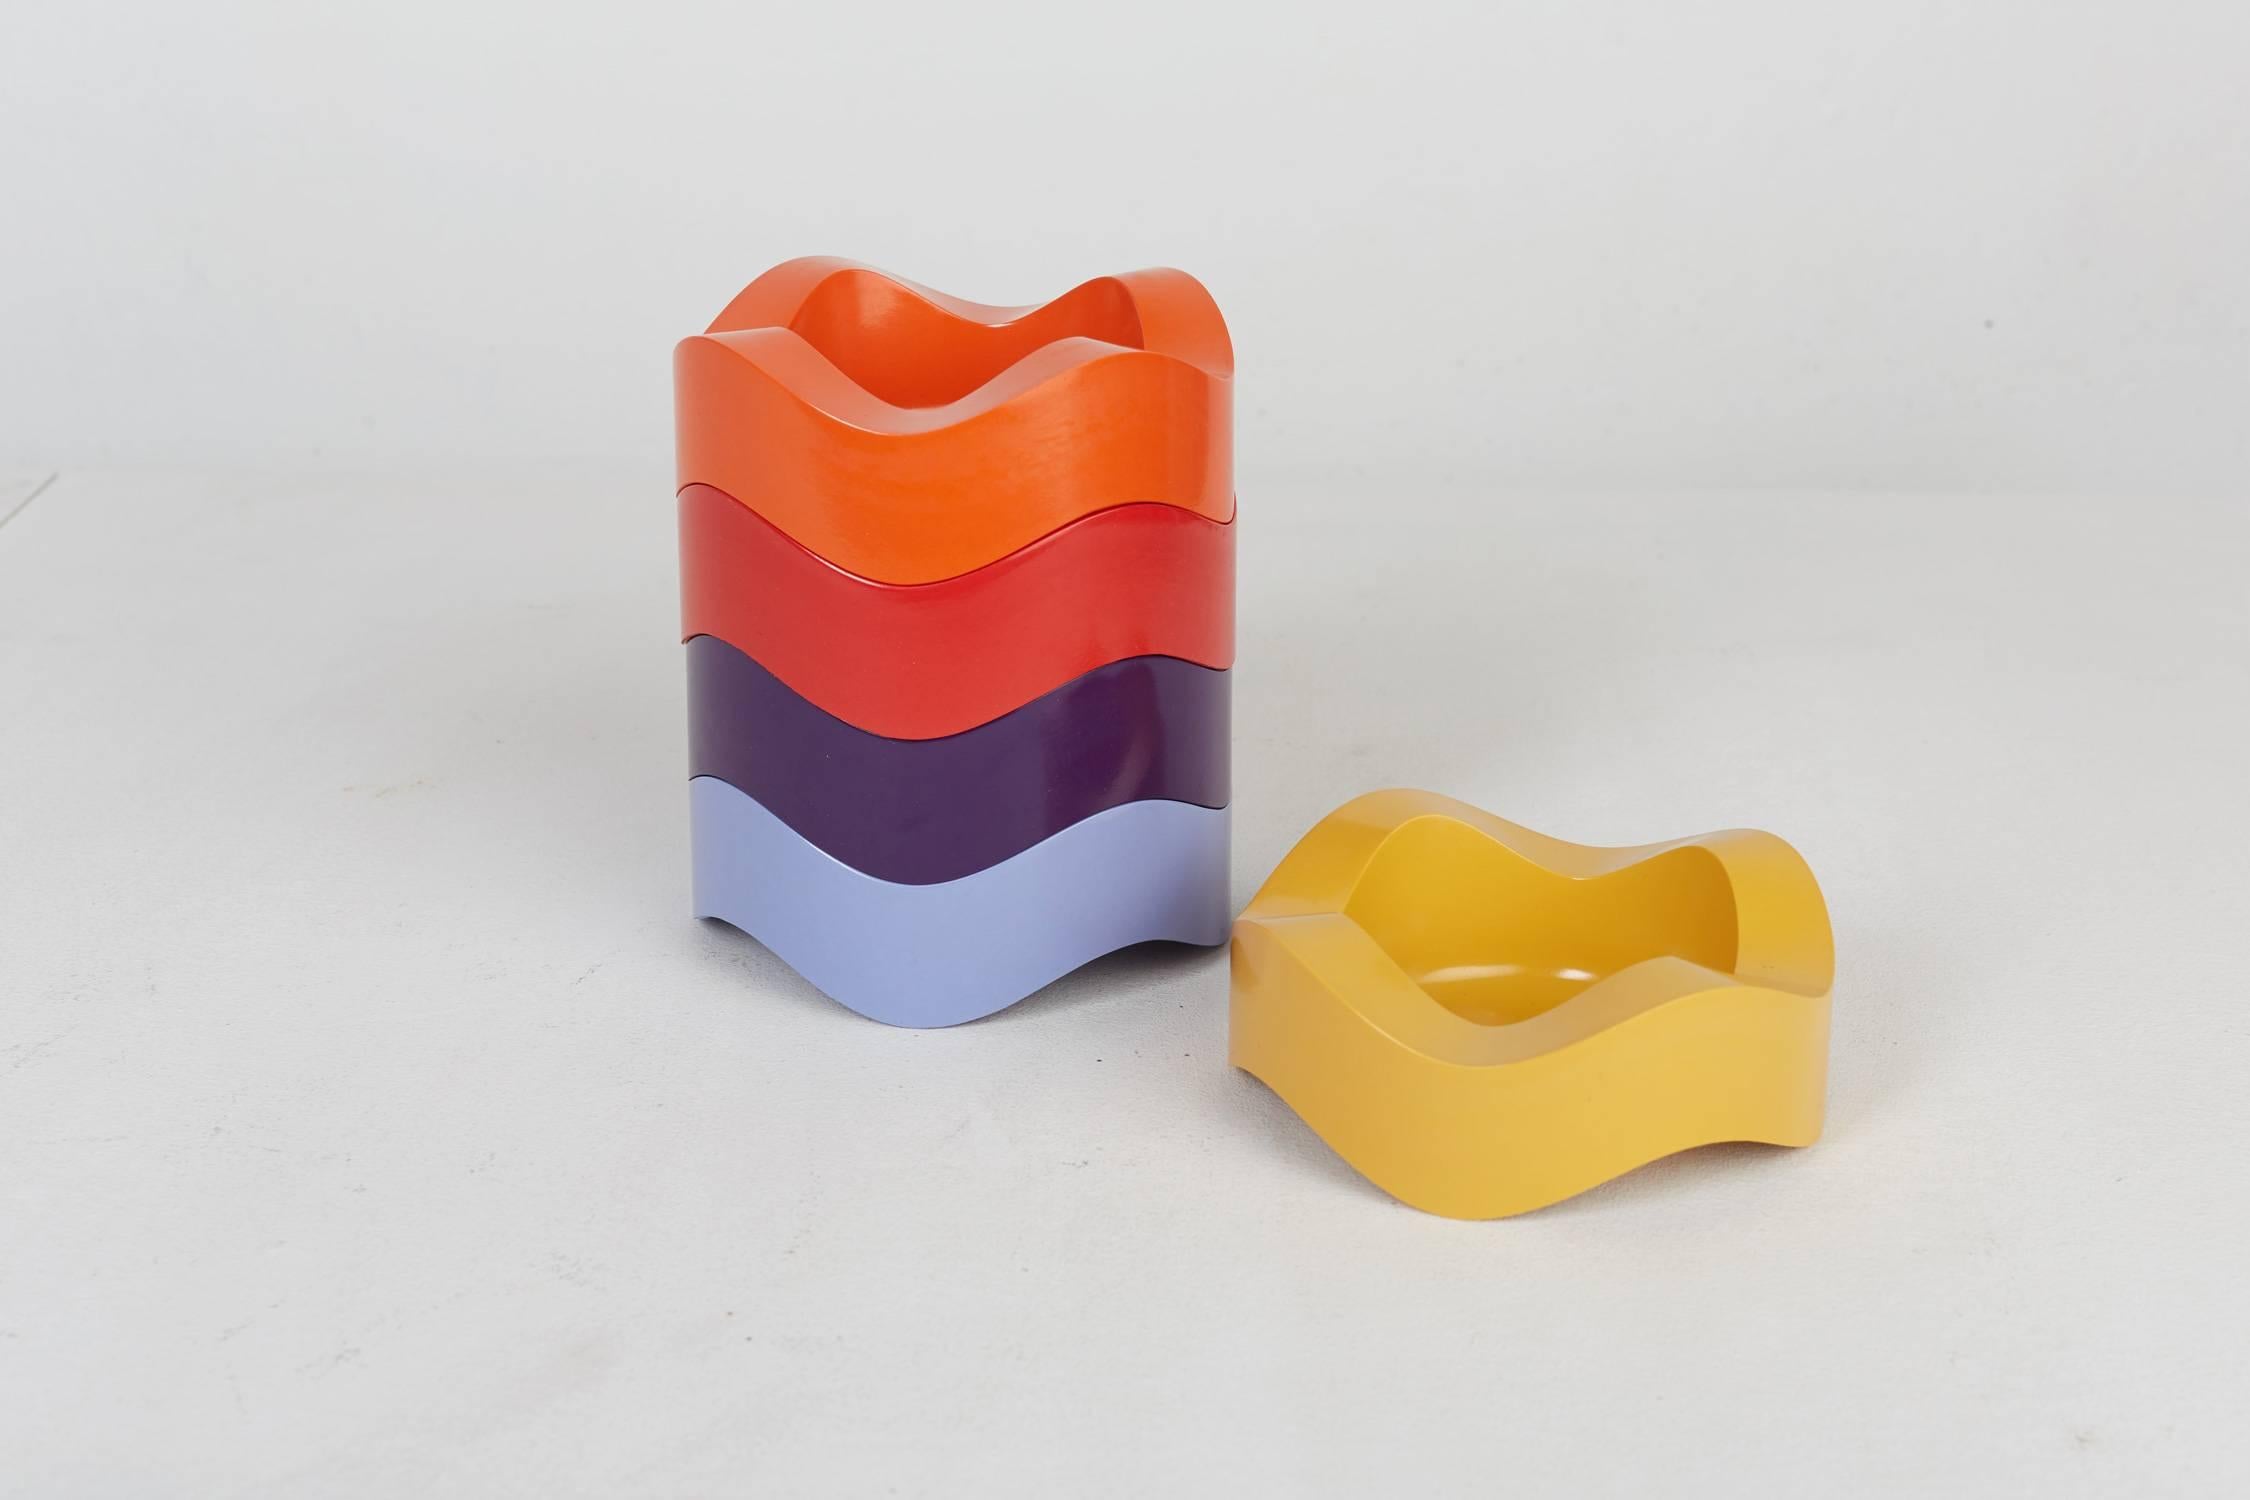 Five stackable ashtrays 'Sinus', model no. 84005.
Design by Walter Zeischeg (1966).
Manufactured by Helit, Germany.
Red, orange, yellow, purple and lilac melamine.
Measures: D 13 cm, H 5 cm.
Out of production.